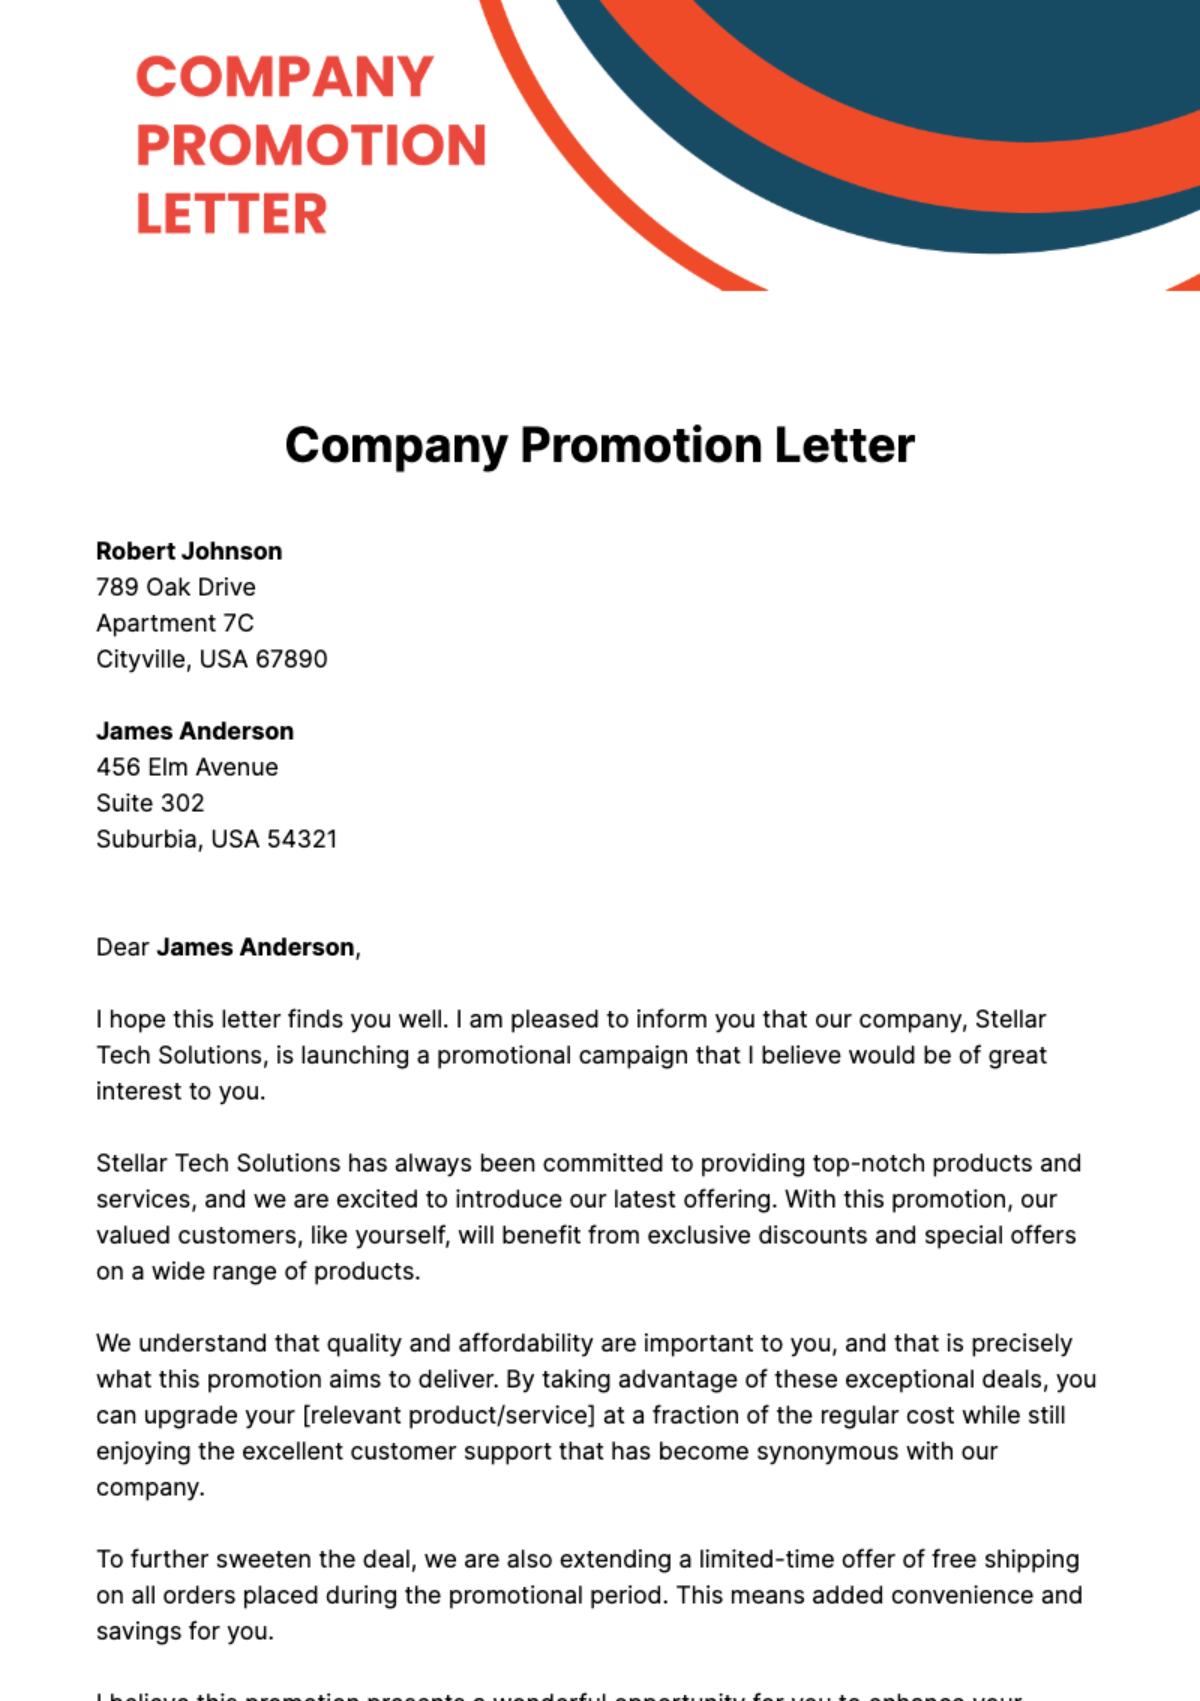 Company Promotion Letter Template